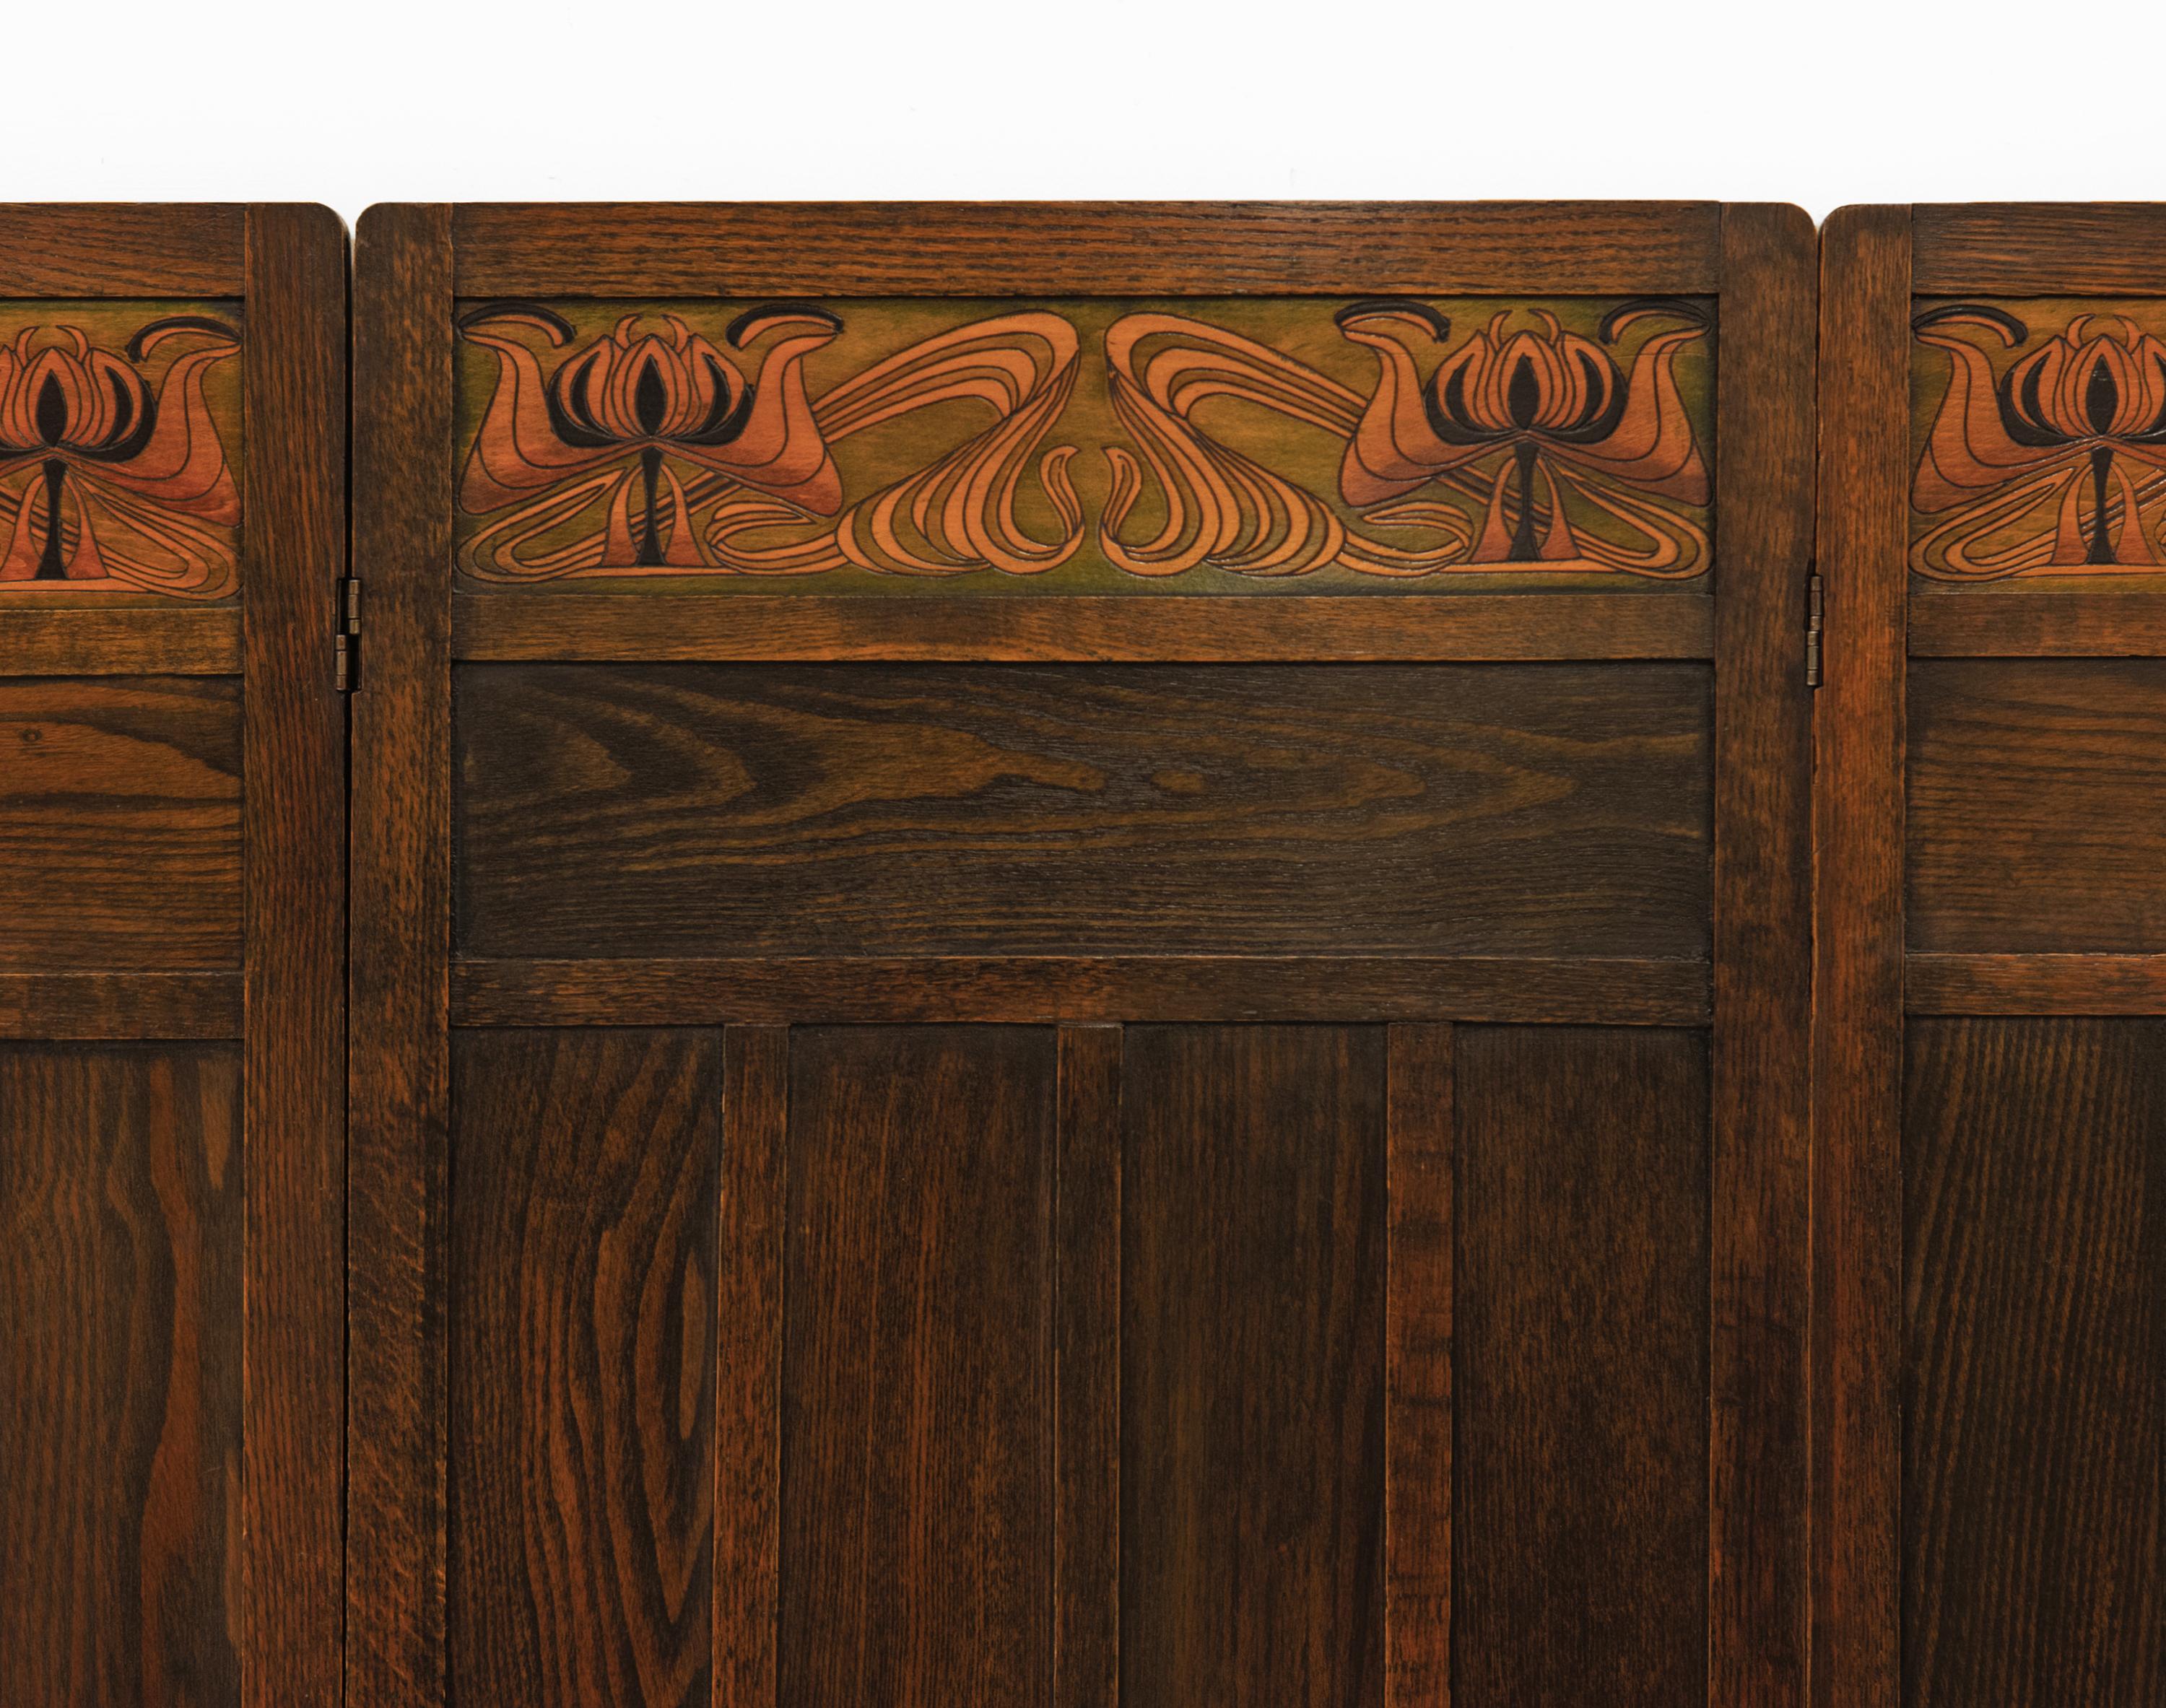 Arts & Crafts oak four fold room screen with sinuous stylised stained top panels. Attributed to Liberty & Co. Circa 1900.

Made in solid panelled oak with the Art Nouveau stained wood panels in beechwood.

In excellent condition, cleaned and waxed.